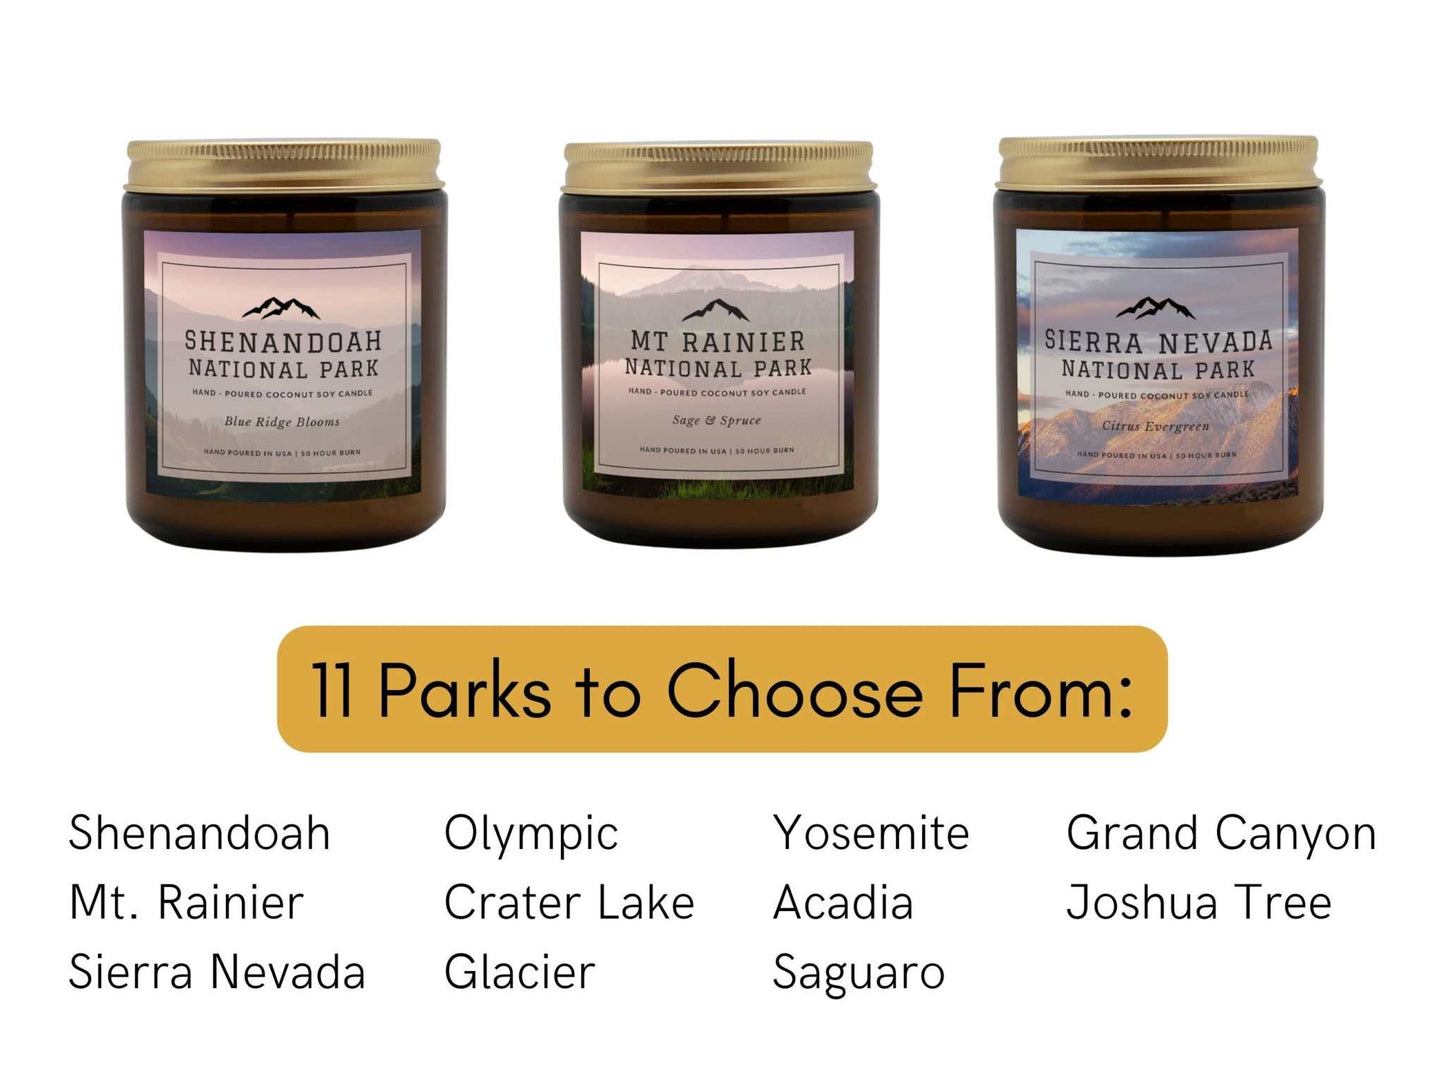 Glacier National Park Huckleberry Vanilla CandleBring home the smell of the most beautiful places on earth, with these 9 oz coconut soy wax hand-poured National Park candles. 
The Glacier National Park scent is a 